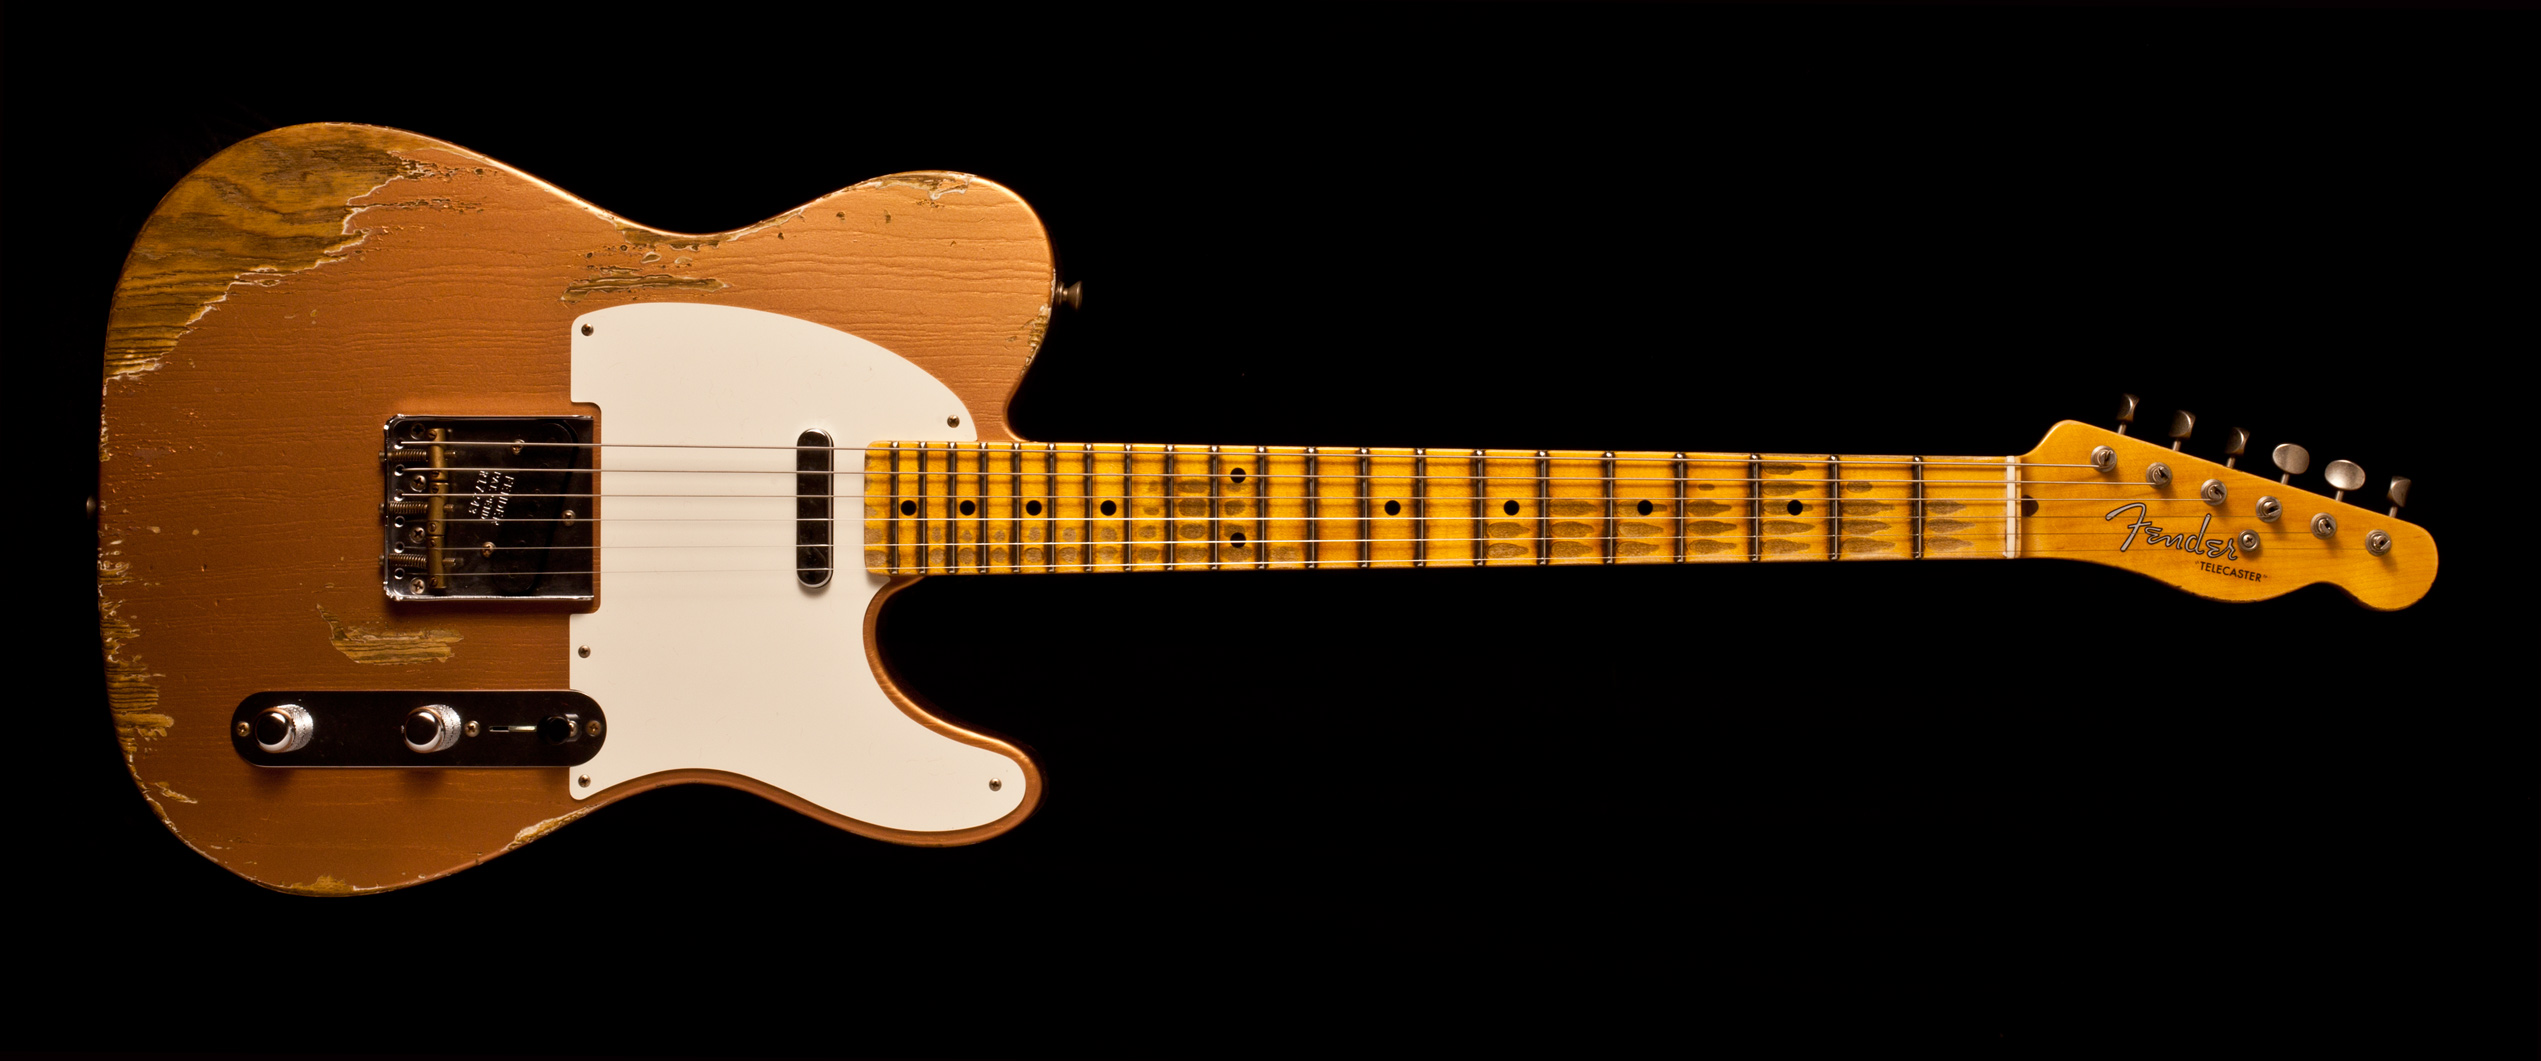 17+ Weight Of Fender Telecaster